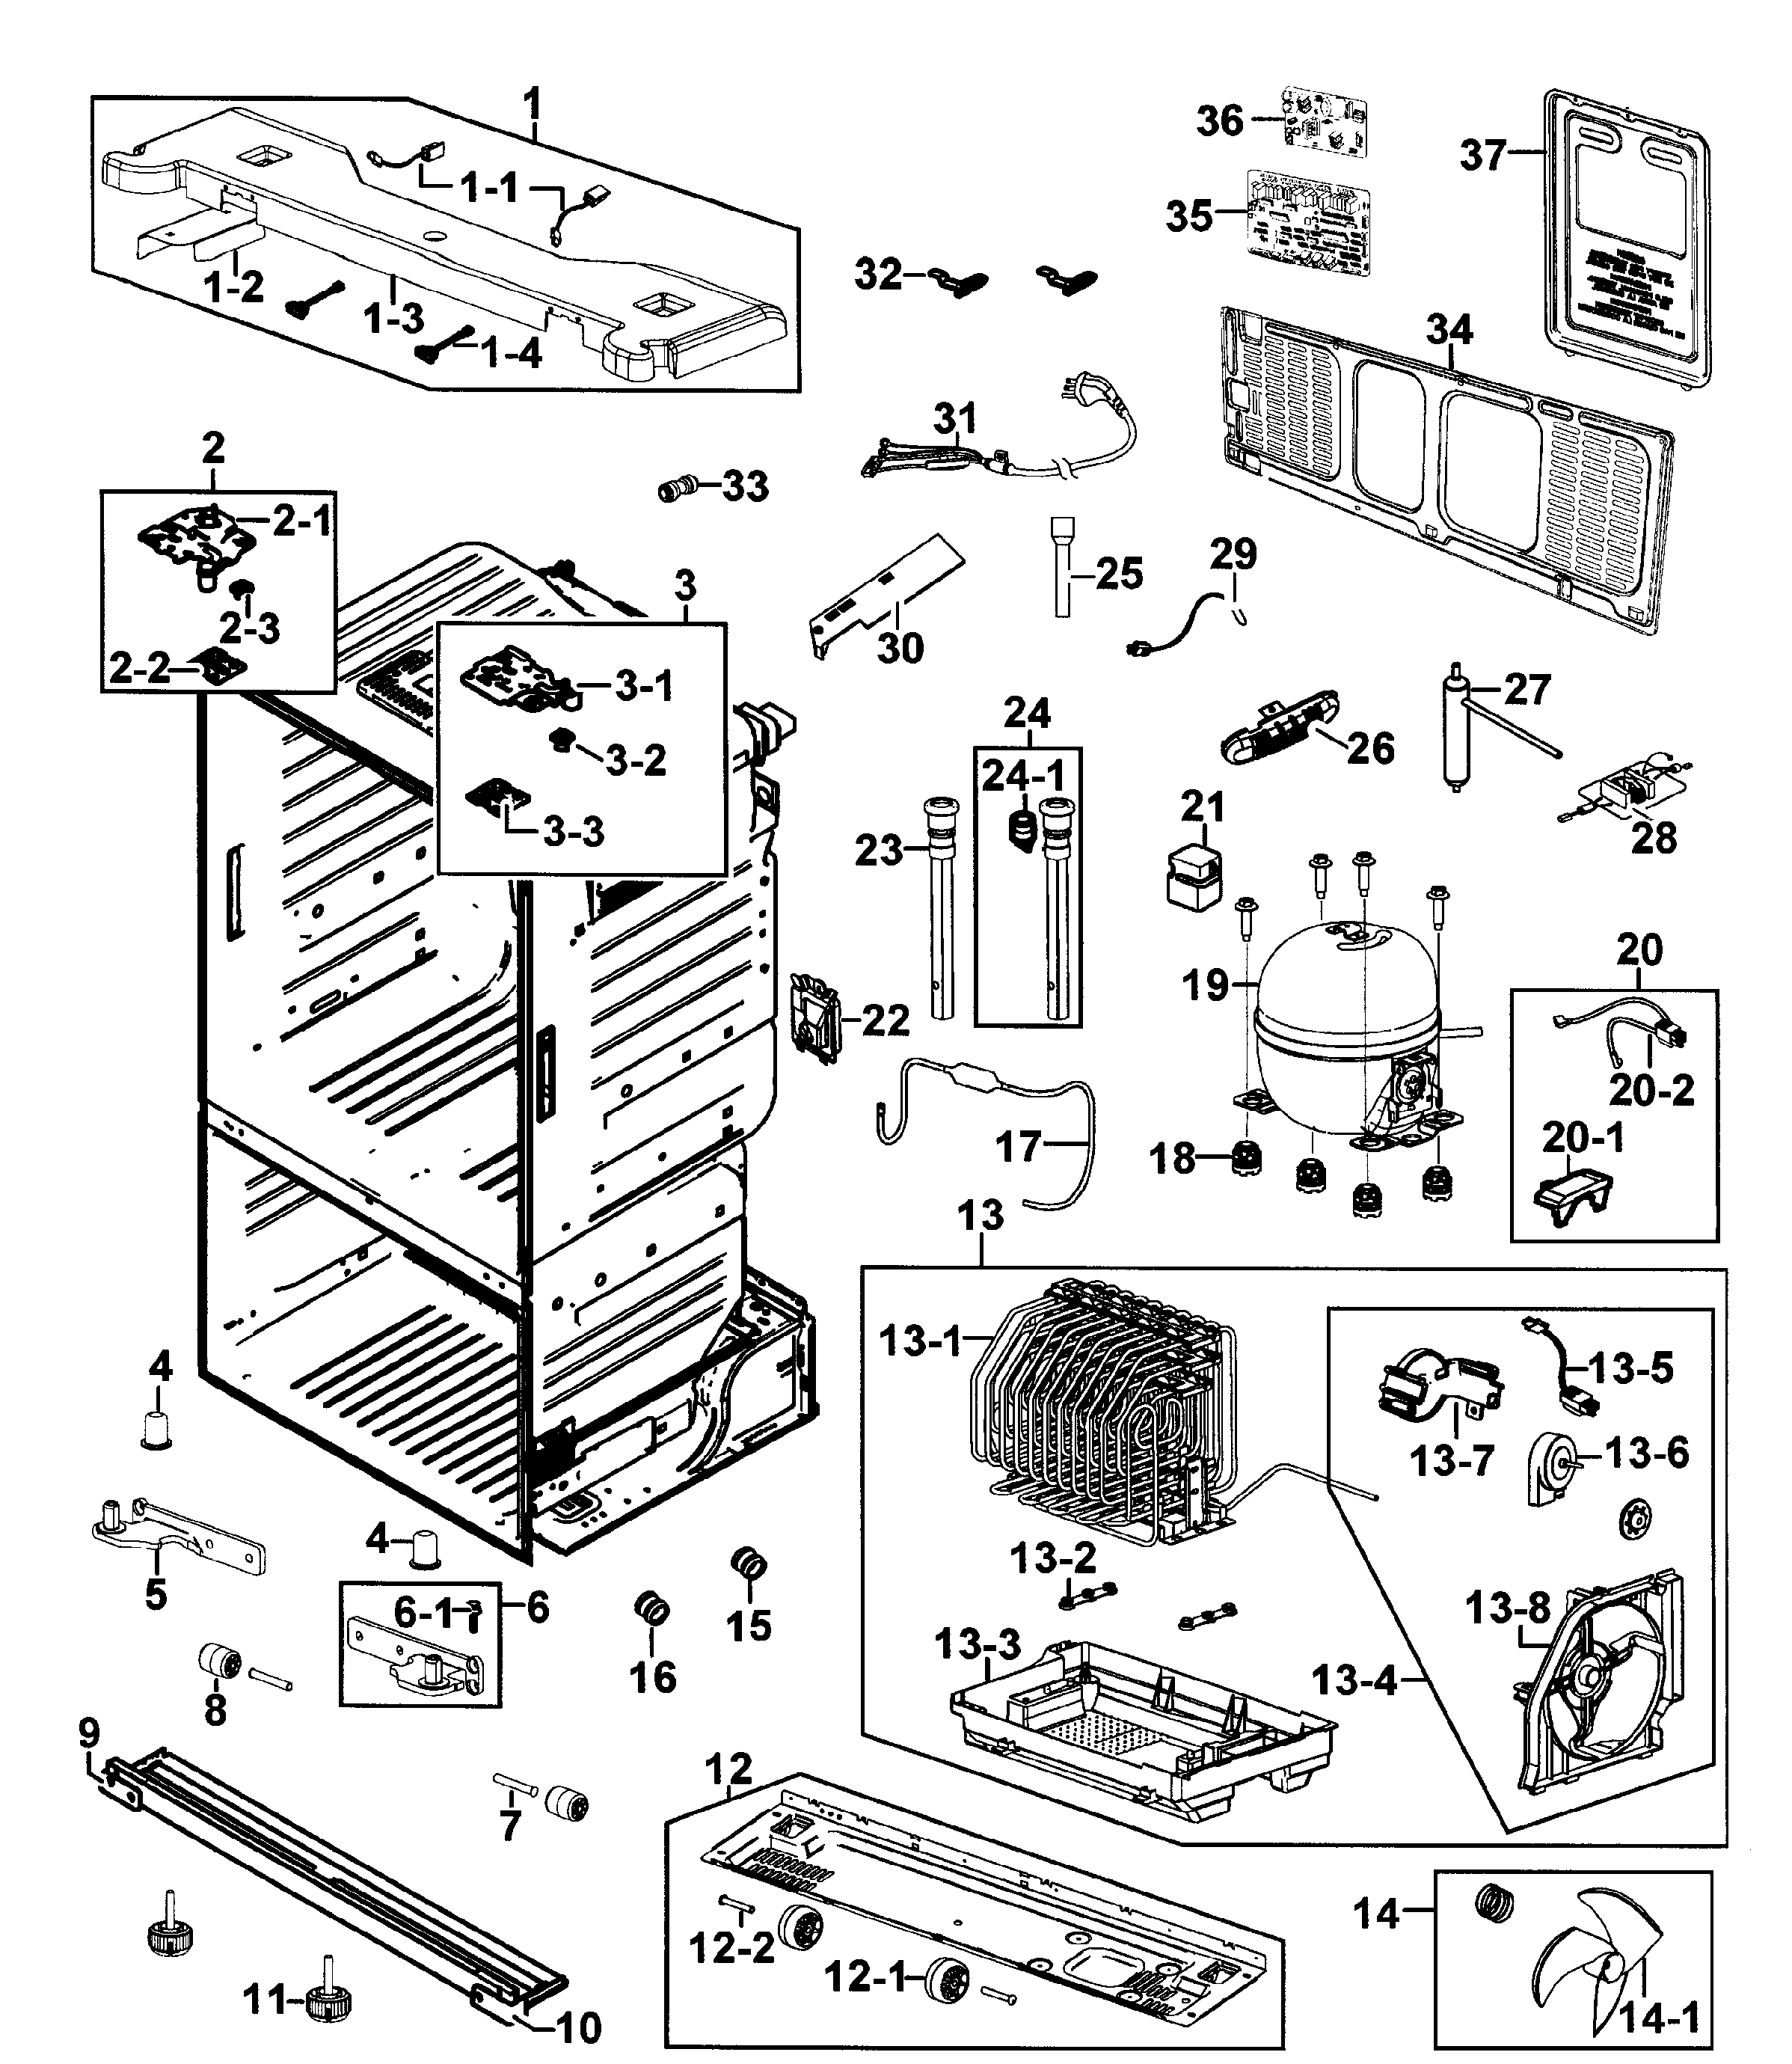 Refrigerator Exploded View